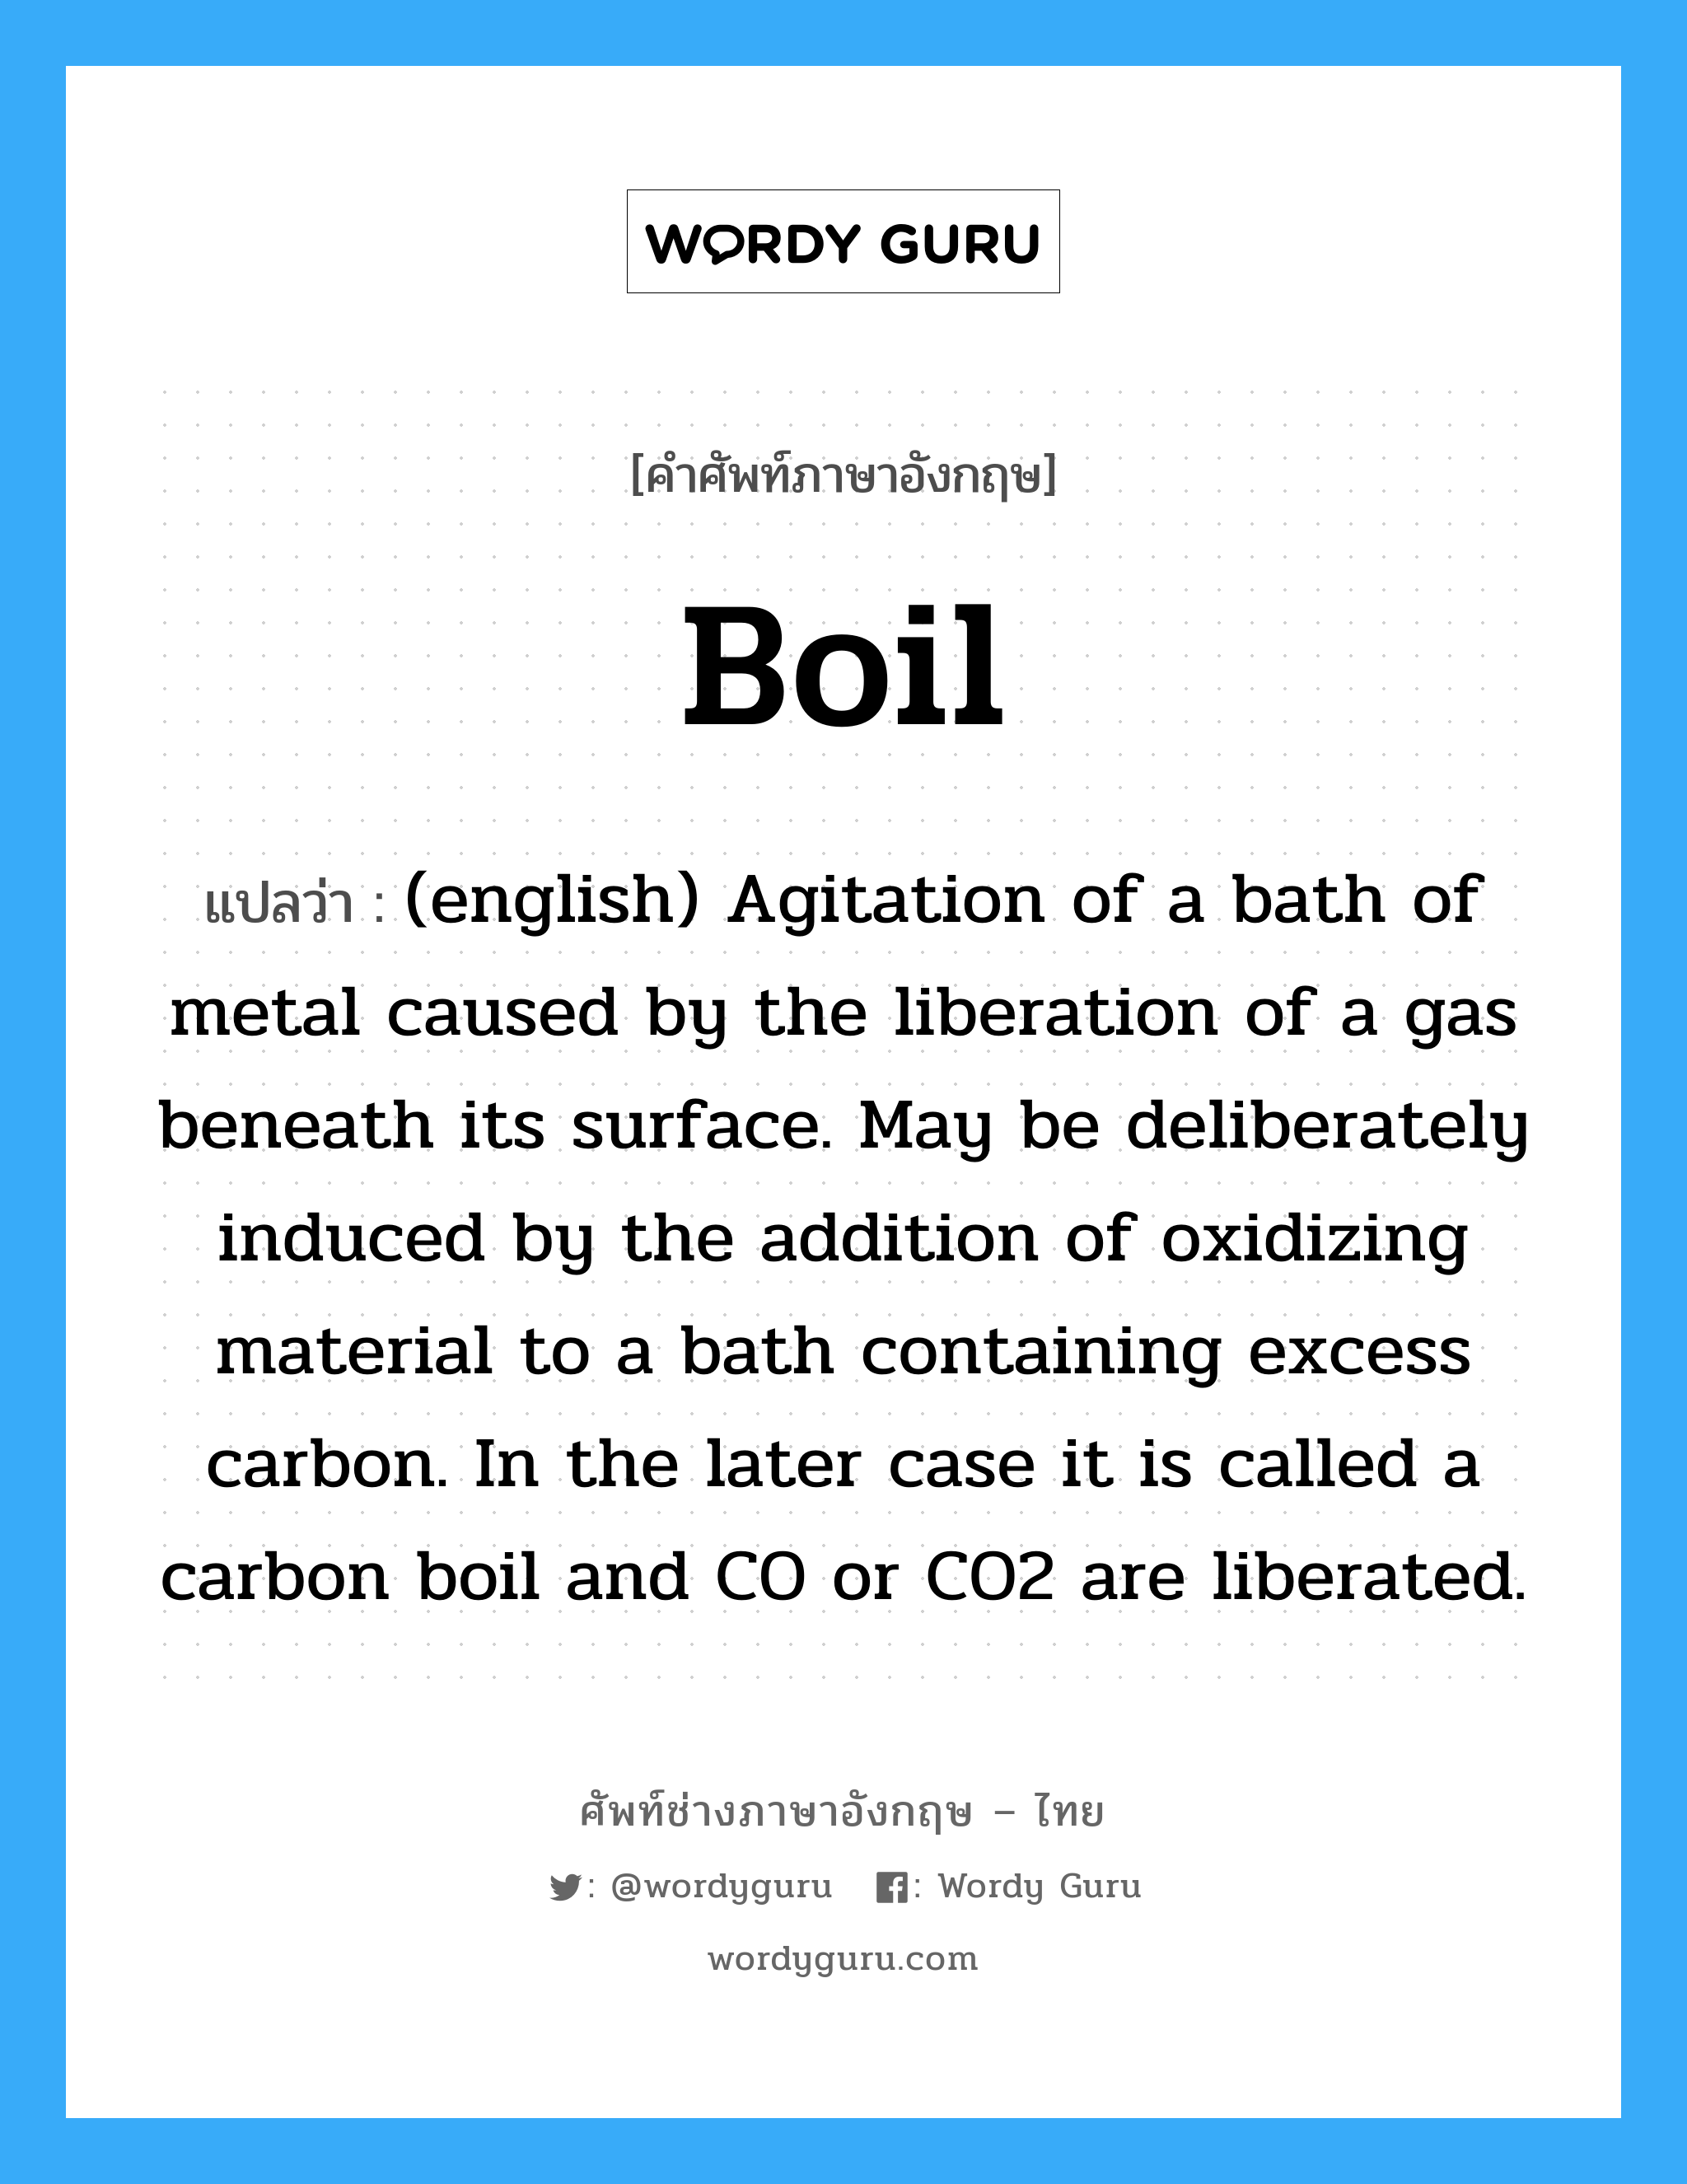 Boil แปลว่า?, คำศัพท์ช่างภาษาอังกฤษ - ไทย Boil คำศัพท์ภาษาอังกฤษ Boil แปลว่า (english) Agitation of a bath of metal caused by the liberation of a gas beneath its surface. May be deliberately induced by the addition of oxidizing material to a bath containing excess carbon. In the later case it is called a carbon boil and CO or CO2 are liberated.